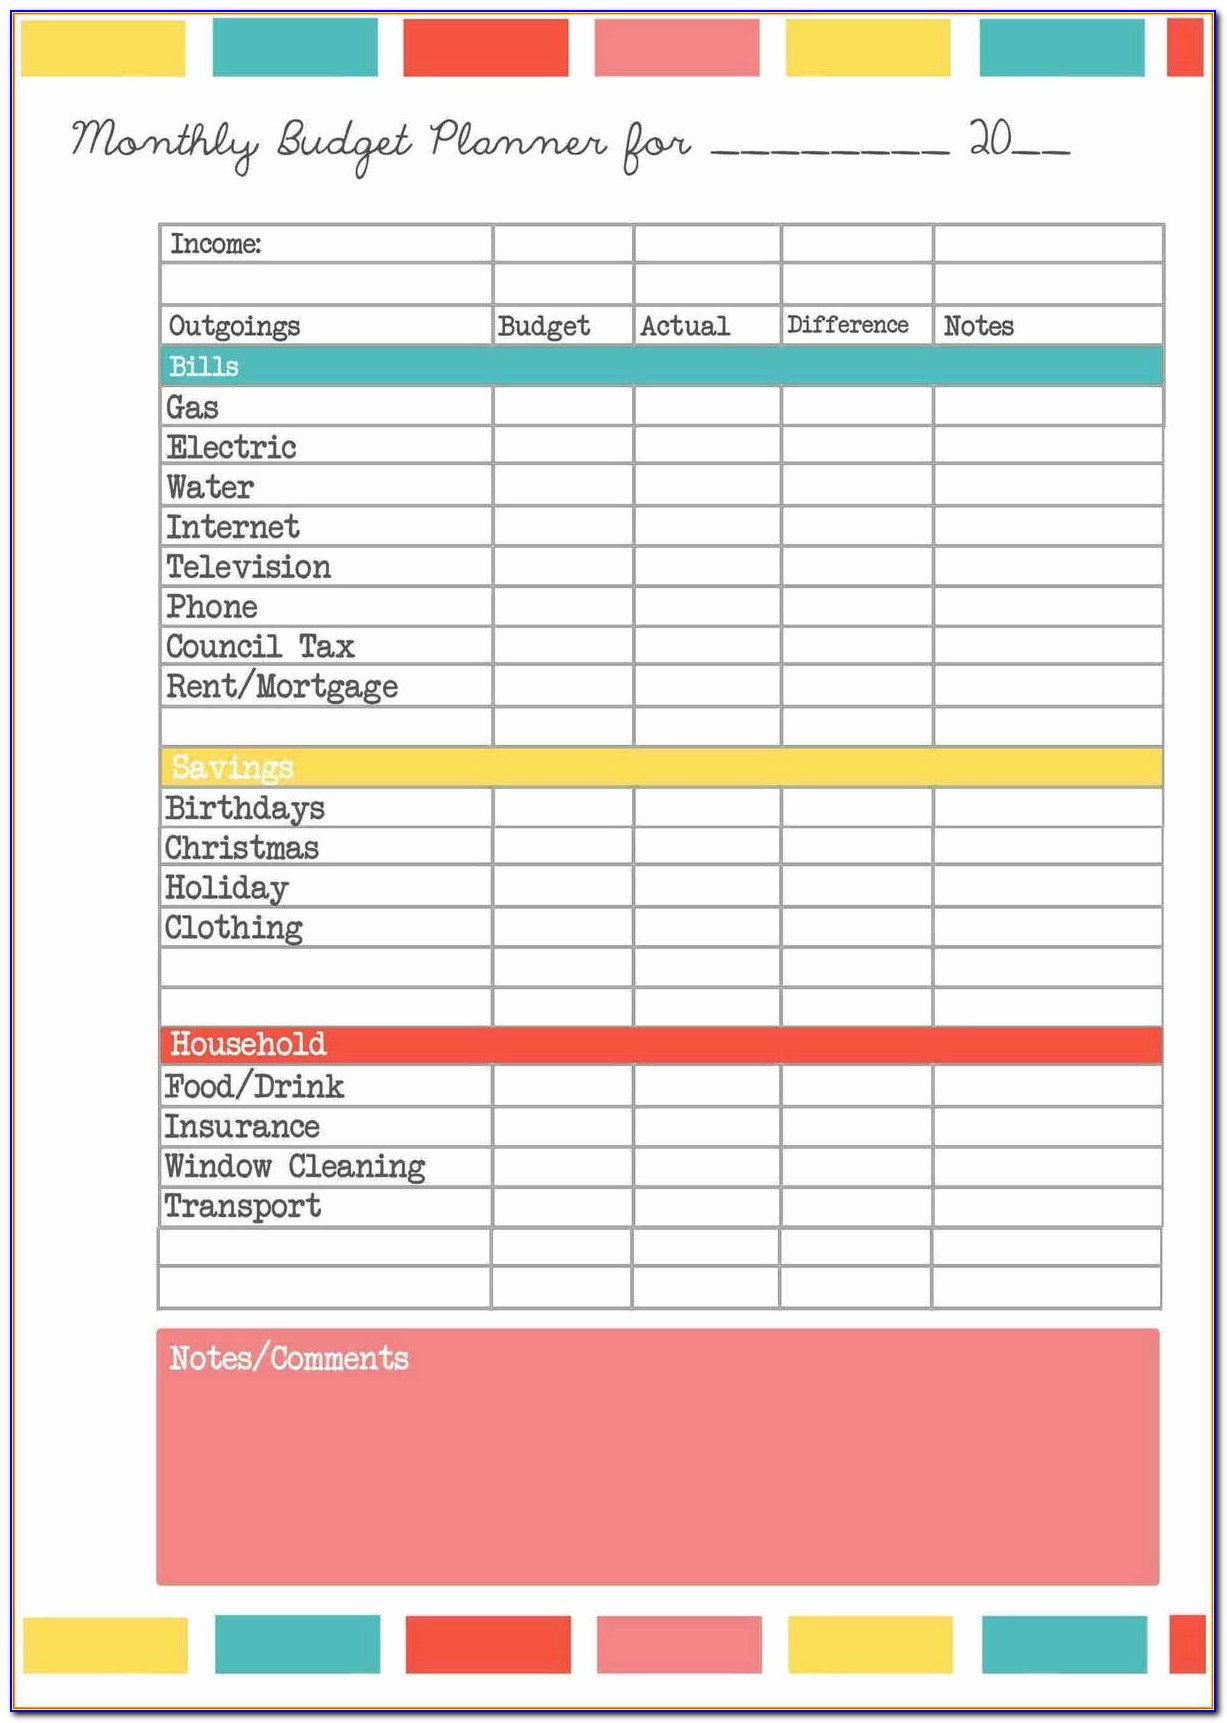 Business Expenses Form Template Uk